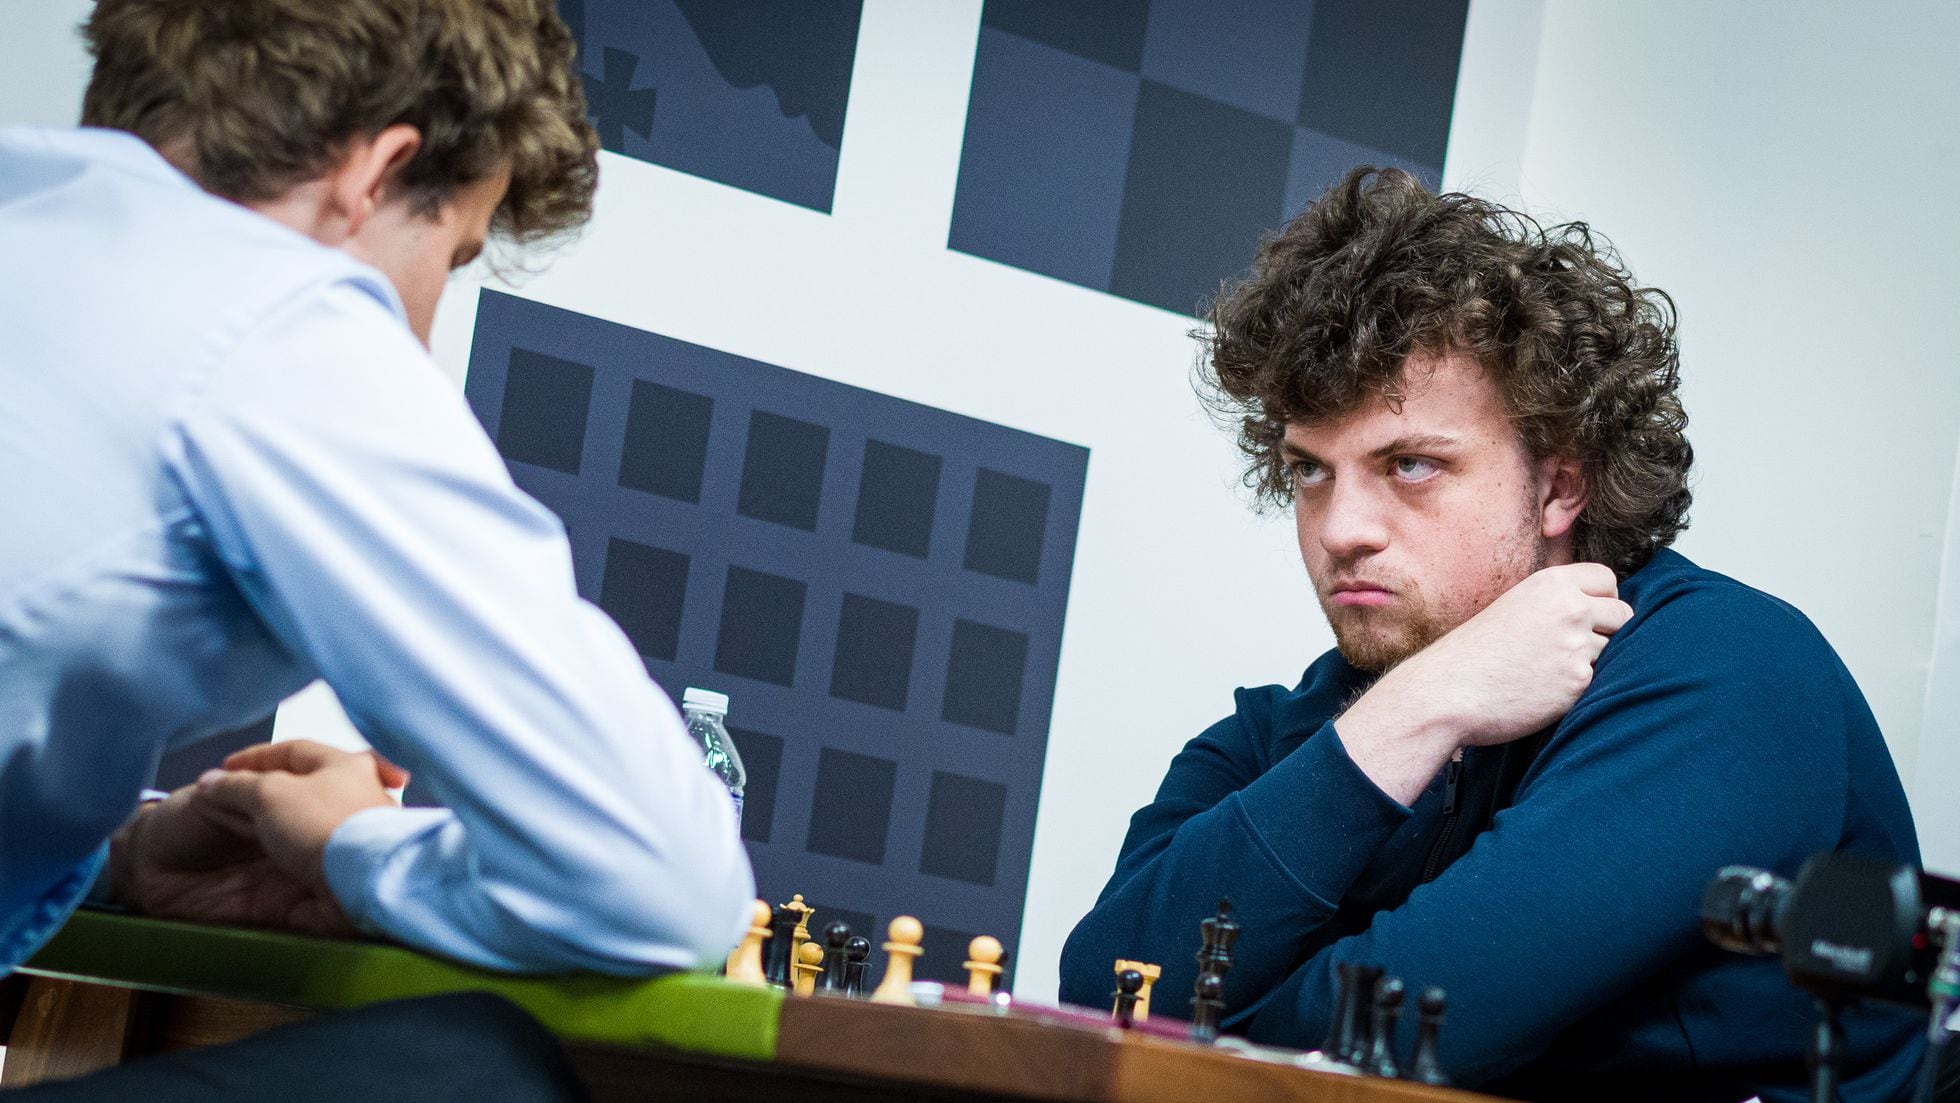 Chess: Niemann back in action after $100m lawsuit against Carlsen